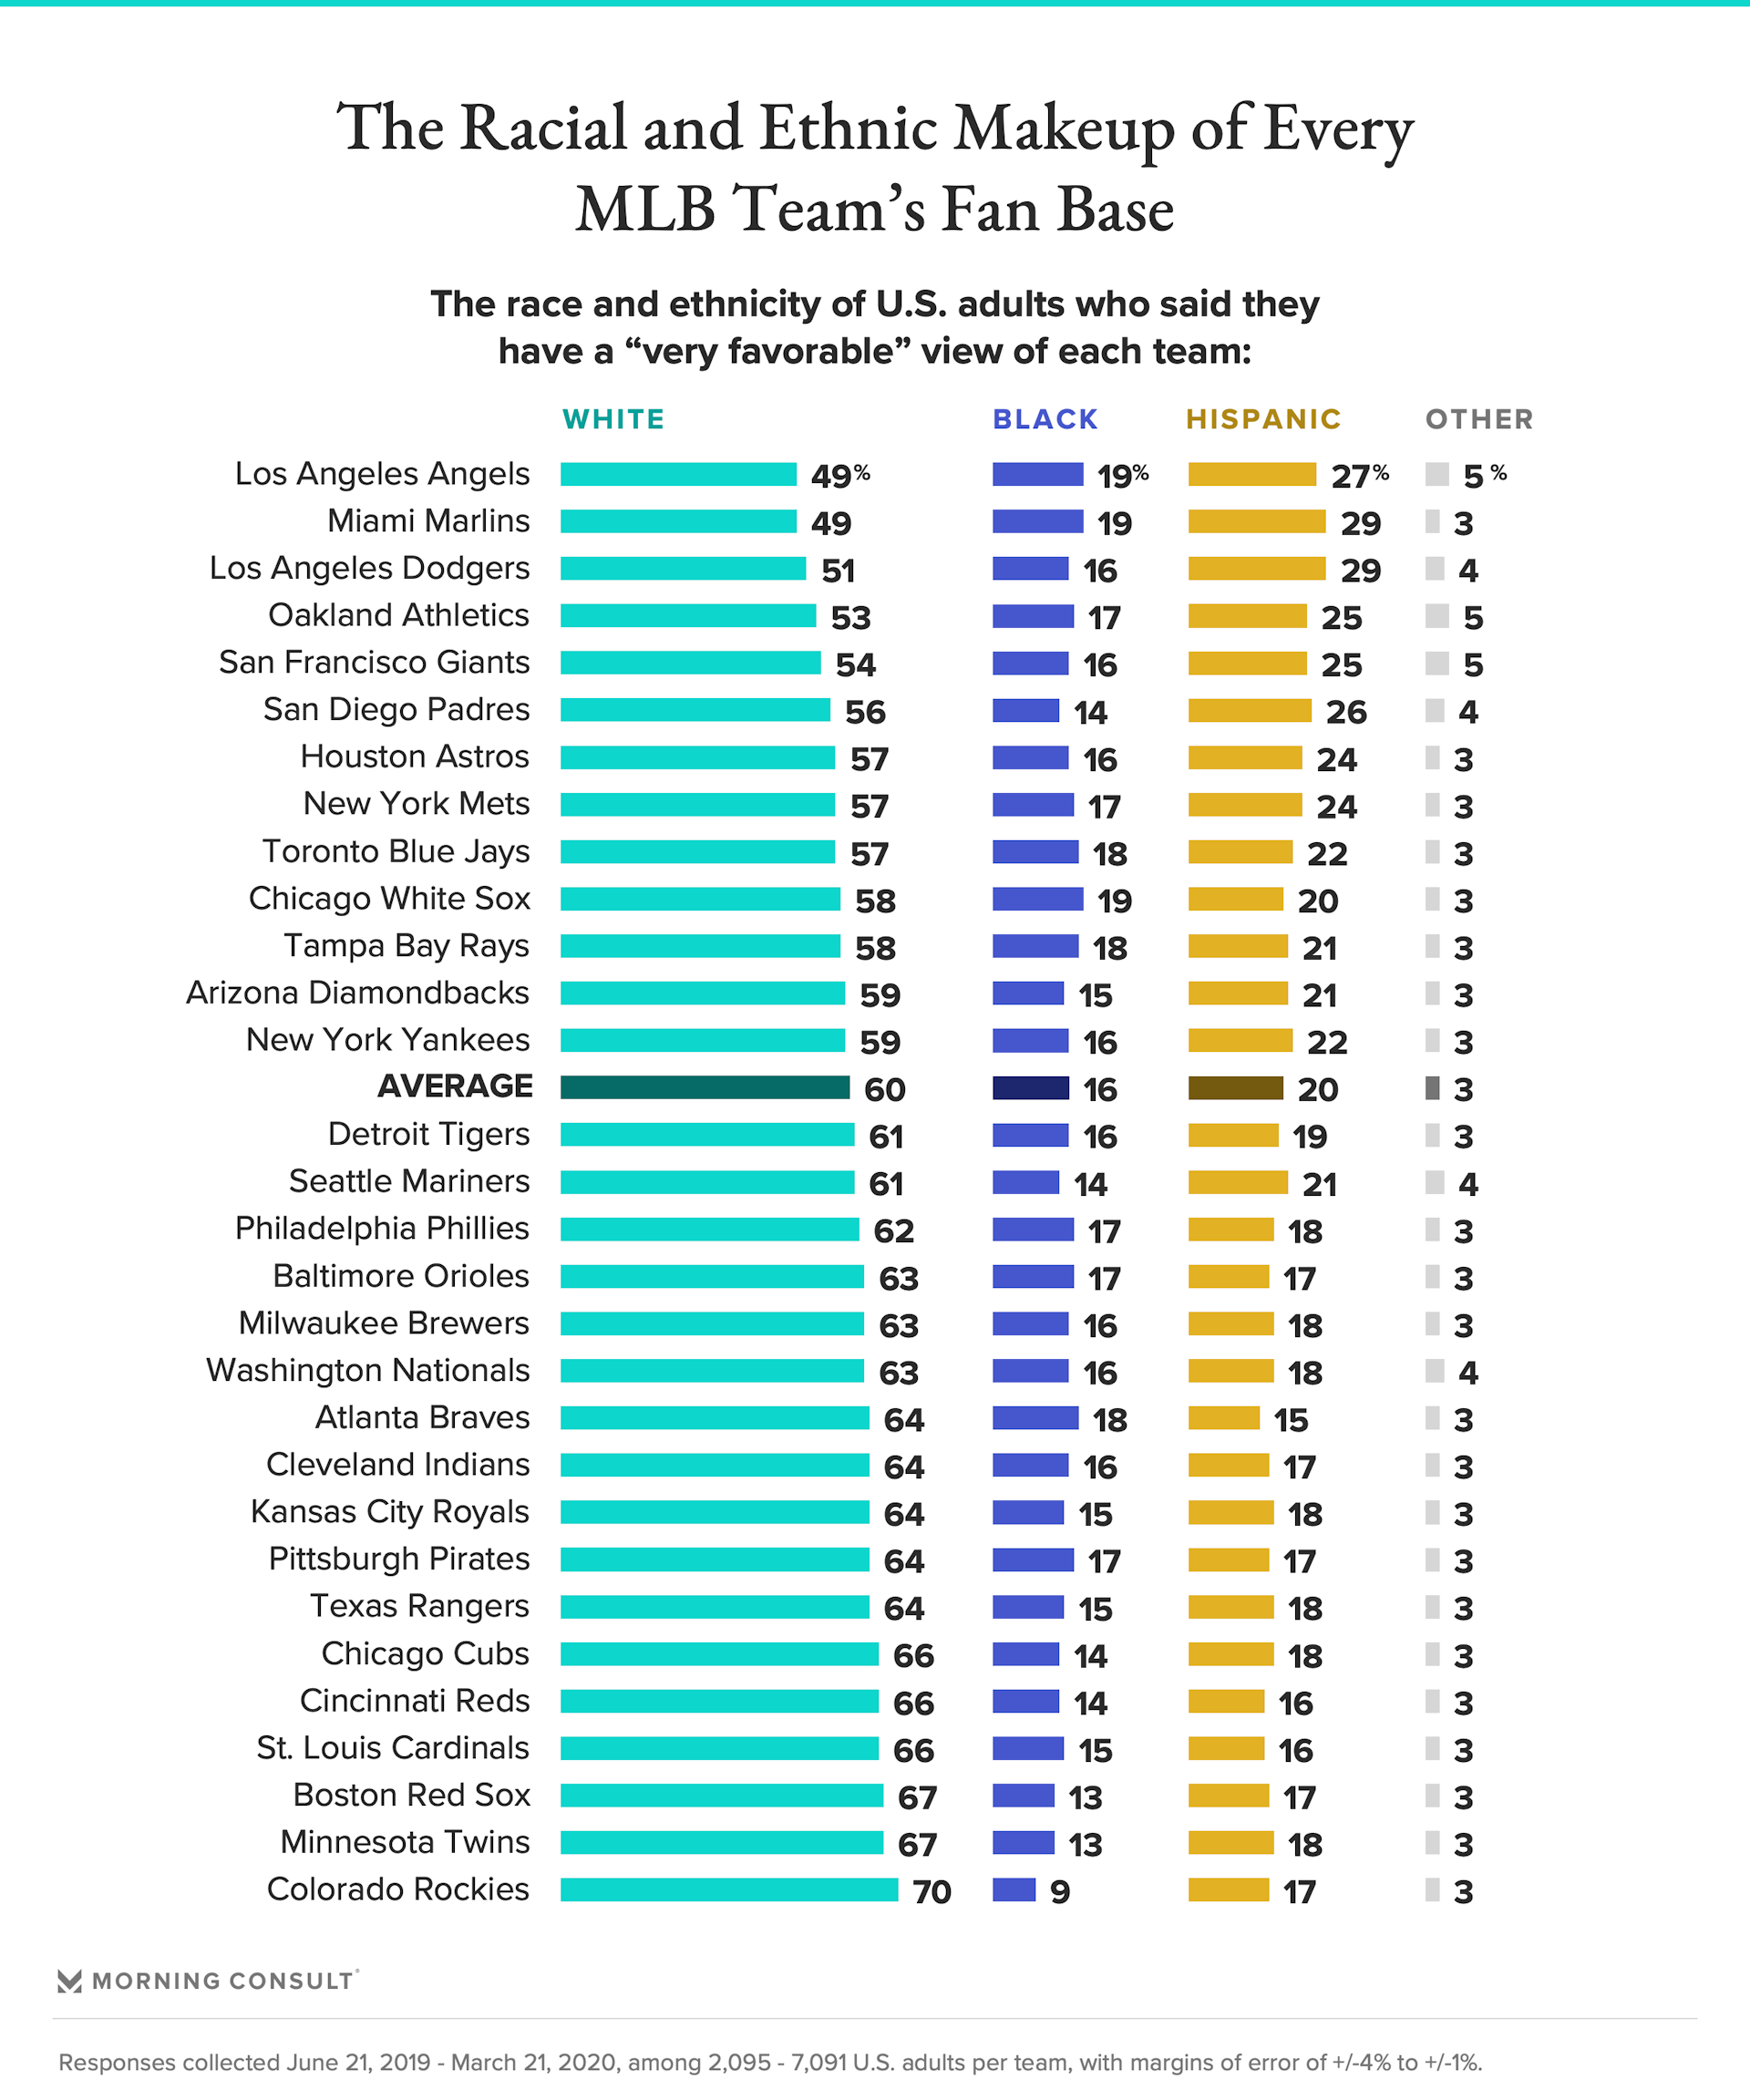 Chart with racial and ethnic makeup of MLB fans